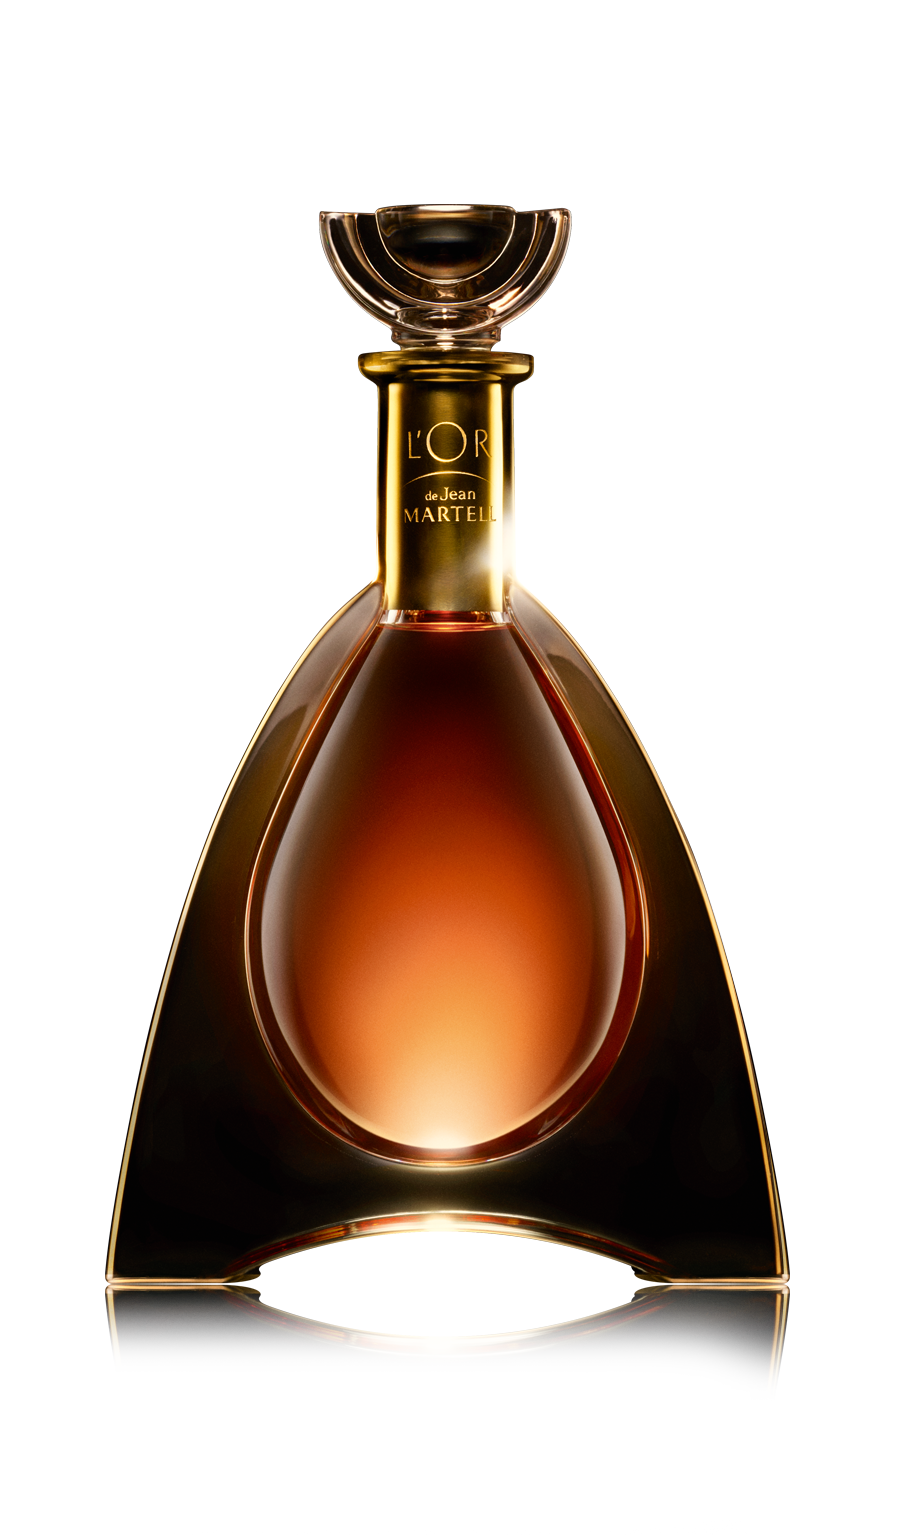 Martell L’OR